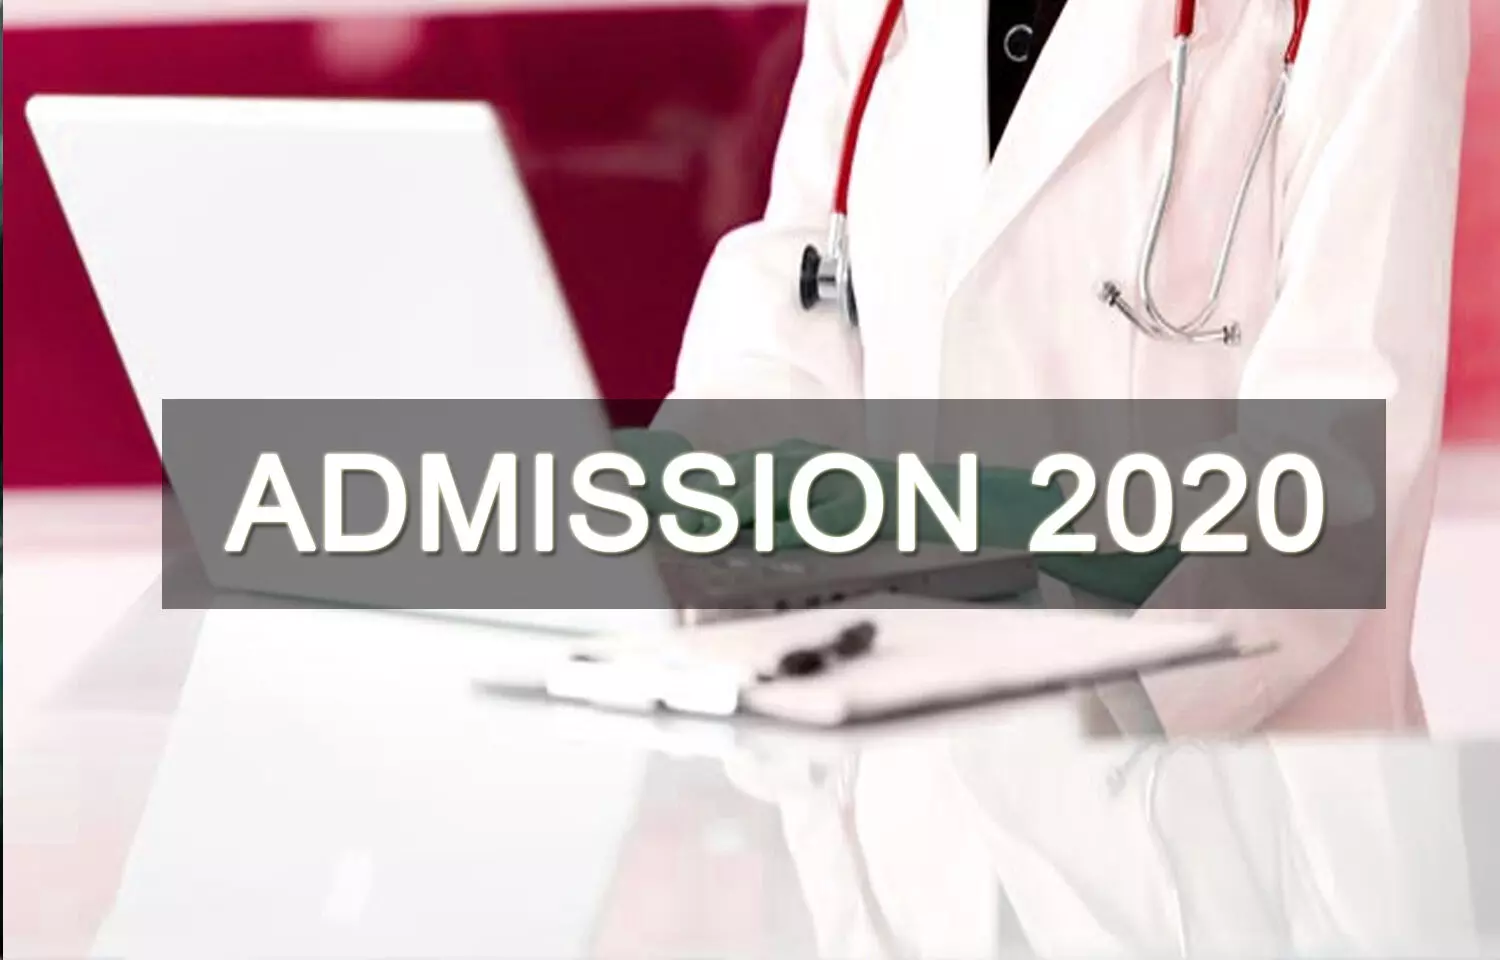 MBBS, BDS AYUSH Admissions 2020 Round 1: WBMCC releases physical reporting procedure for candidates